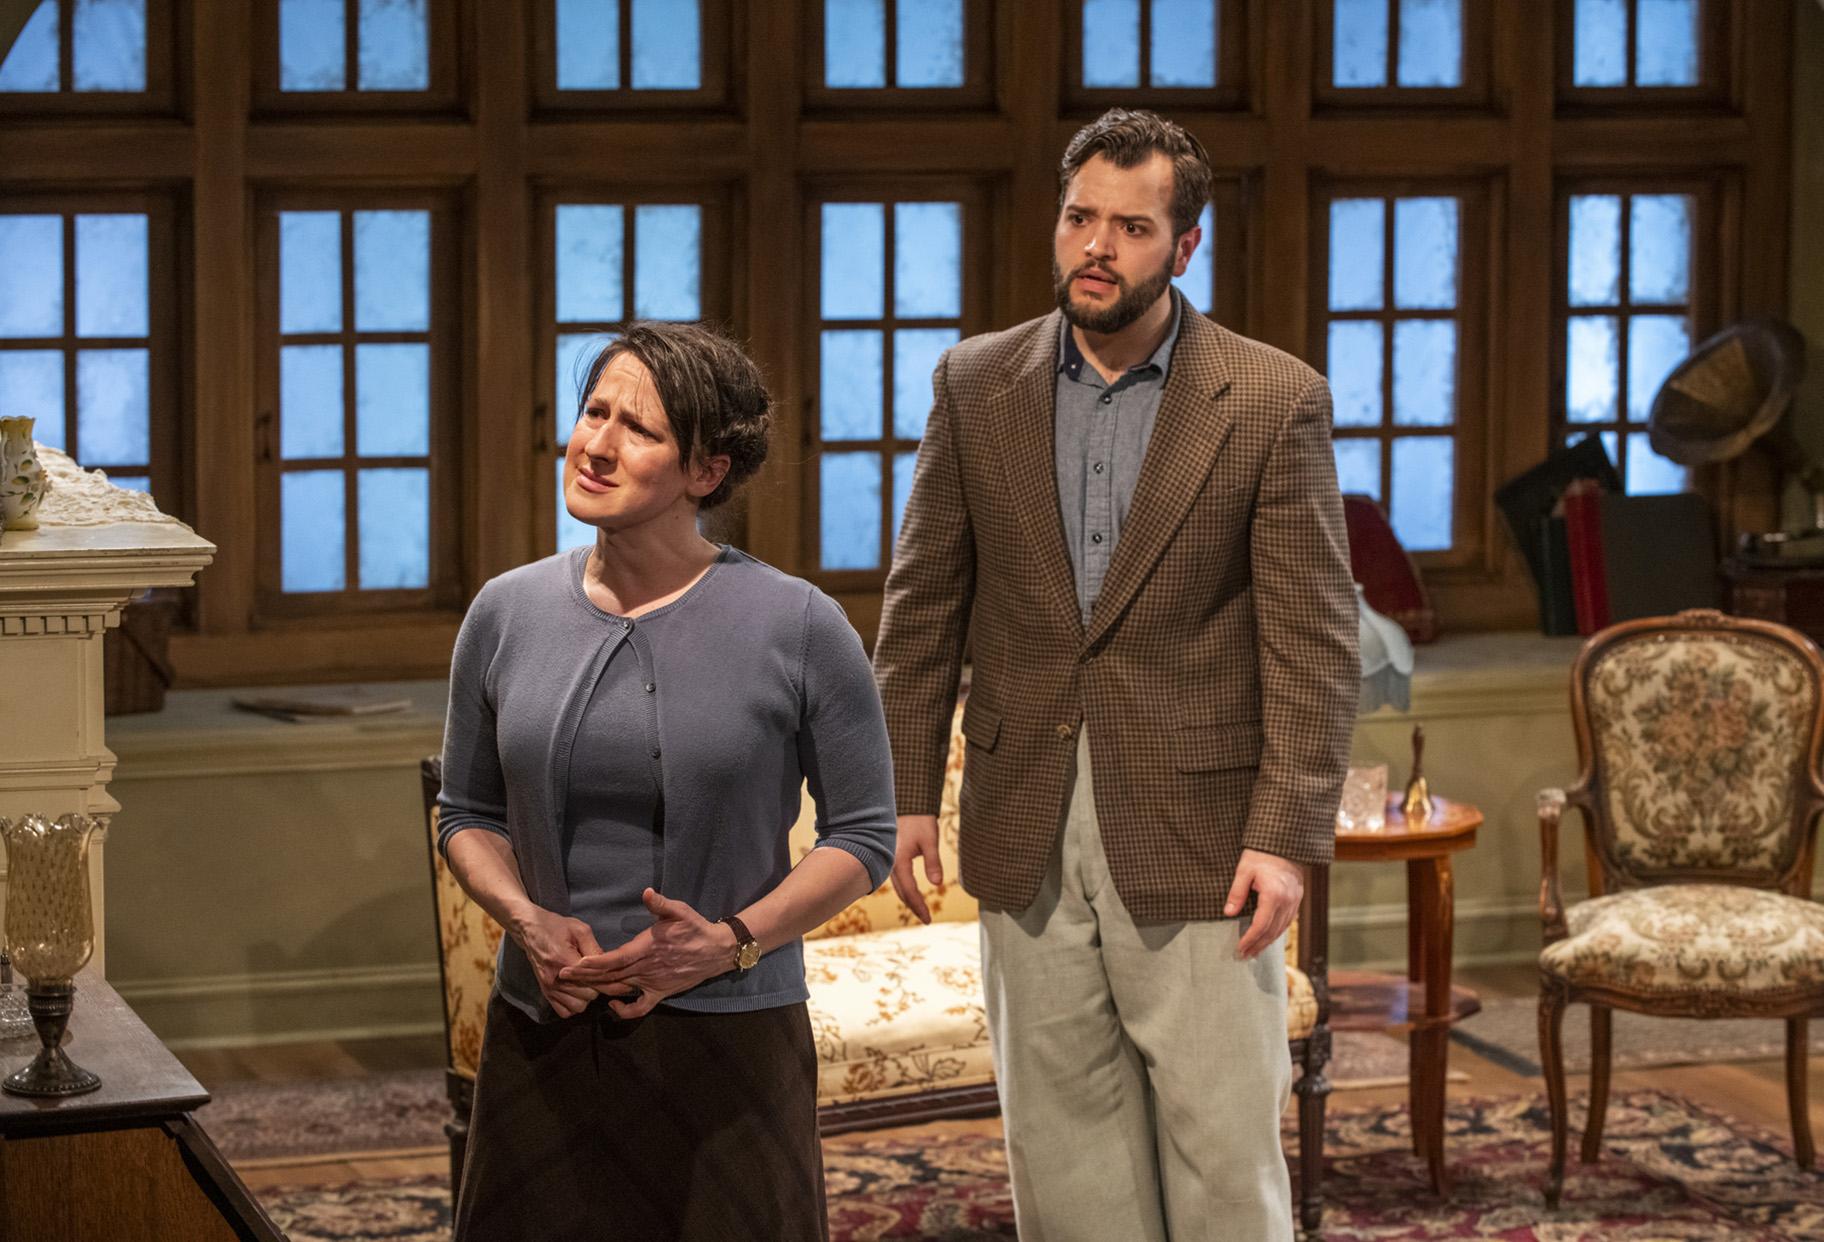 Marika Mashburn and Robert Quintanilla in “For Services Rendered.” (Photo by Michael Brosilow) 